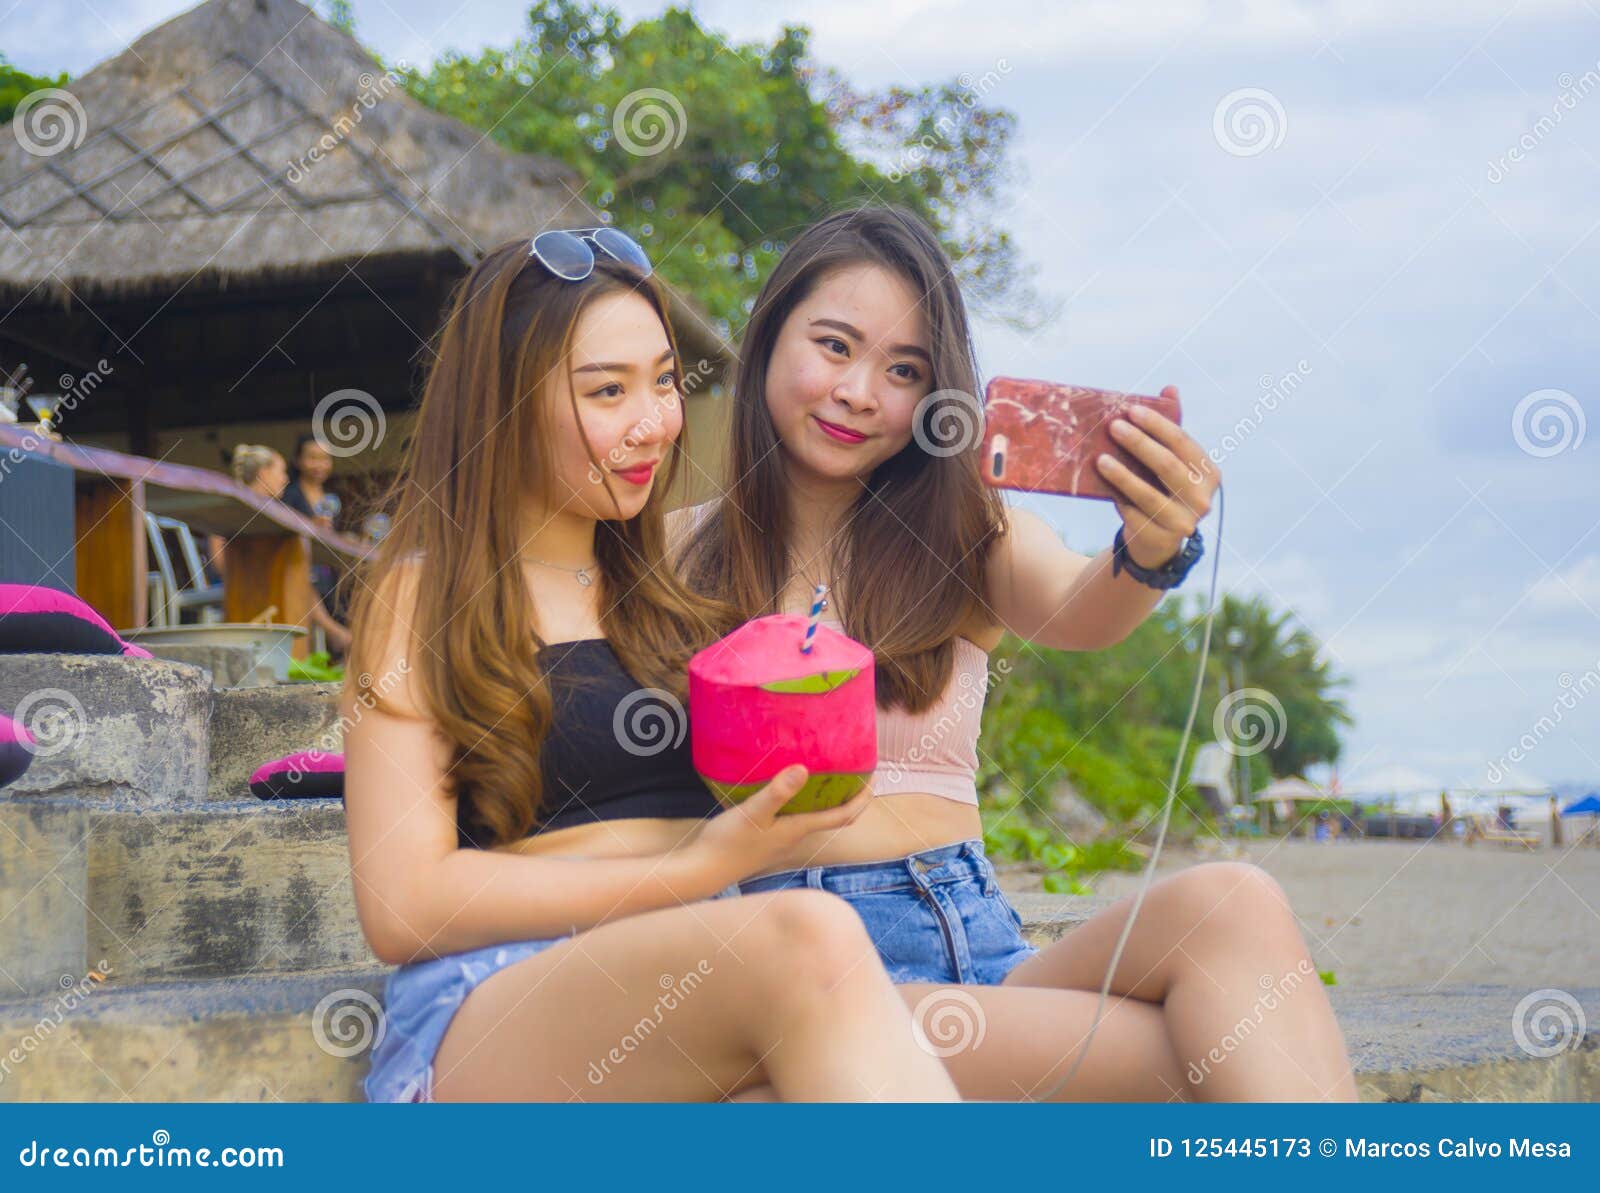 https://thumbs.dreamstime.com/z/two-young-happy-attractive-asian-chinese-korean-women-hanging-out-girlfriends-enjoying-holidays-trip-tropical-resort-125445173.jpg